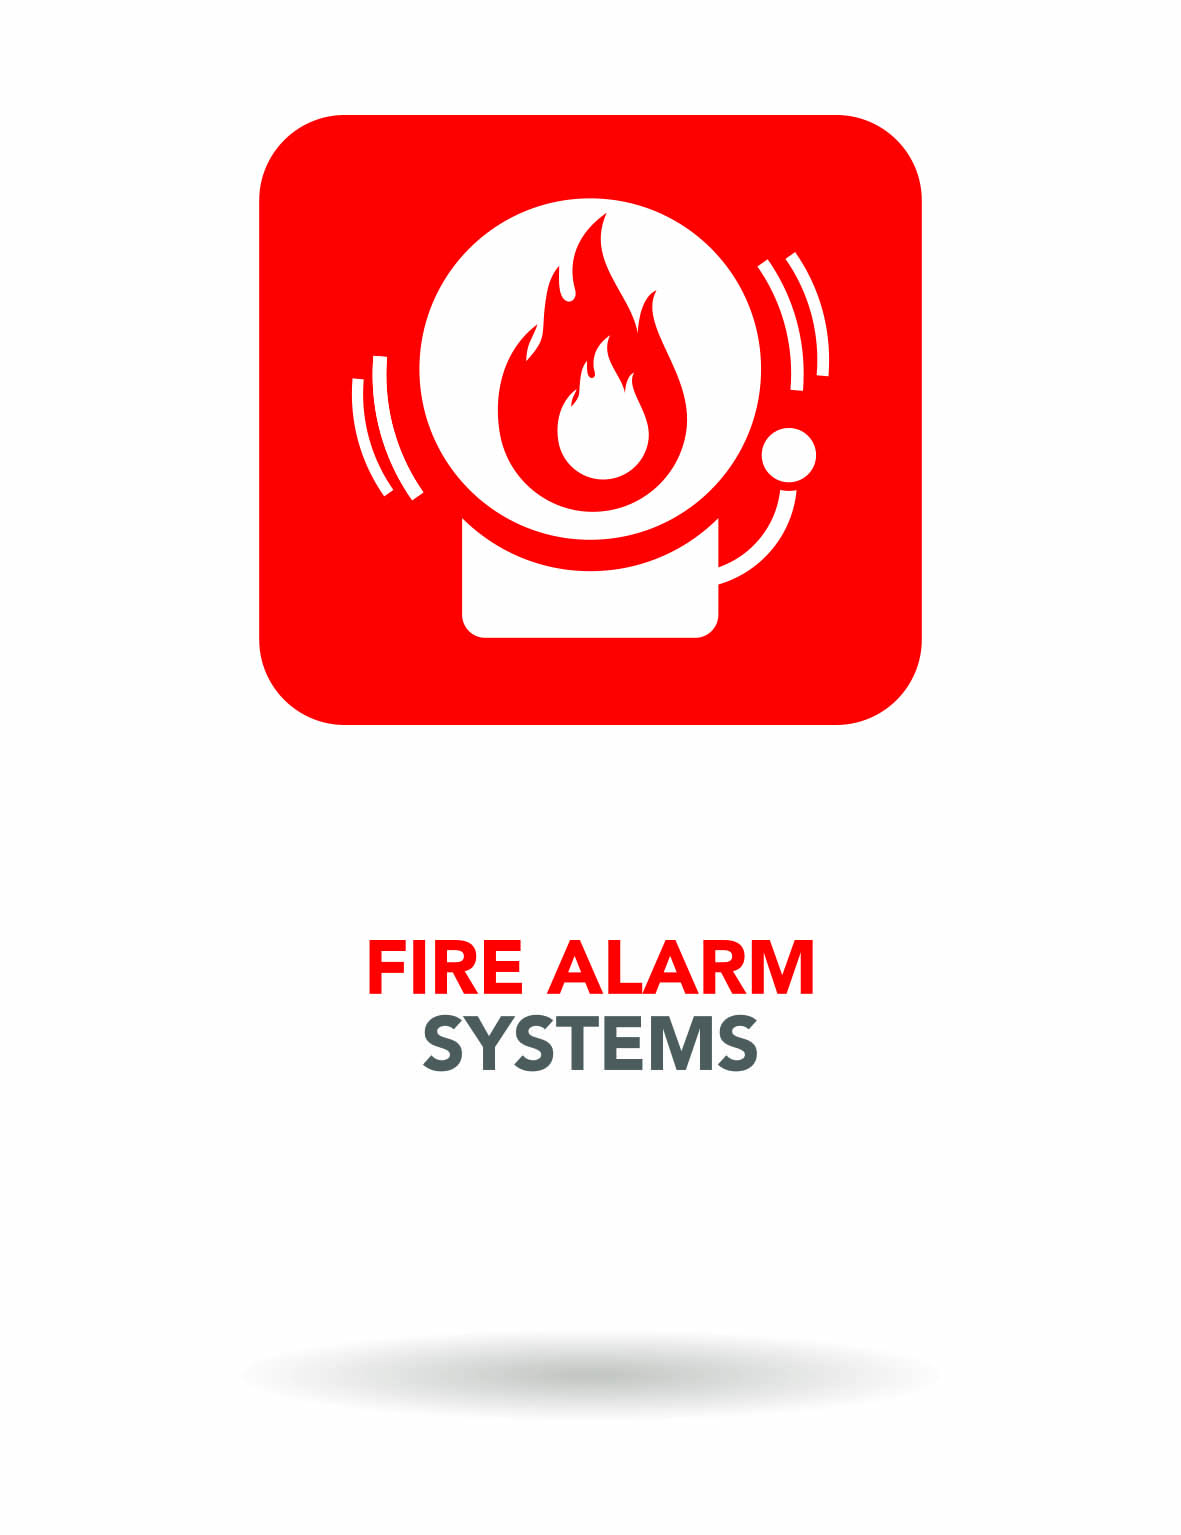 fire alarm systems graphic